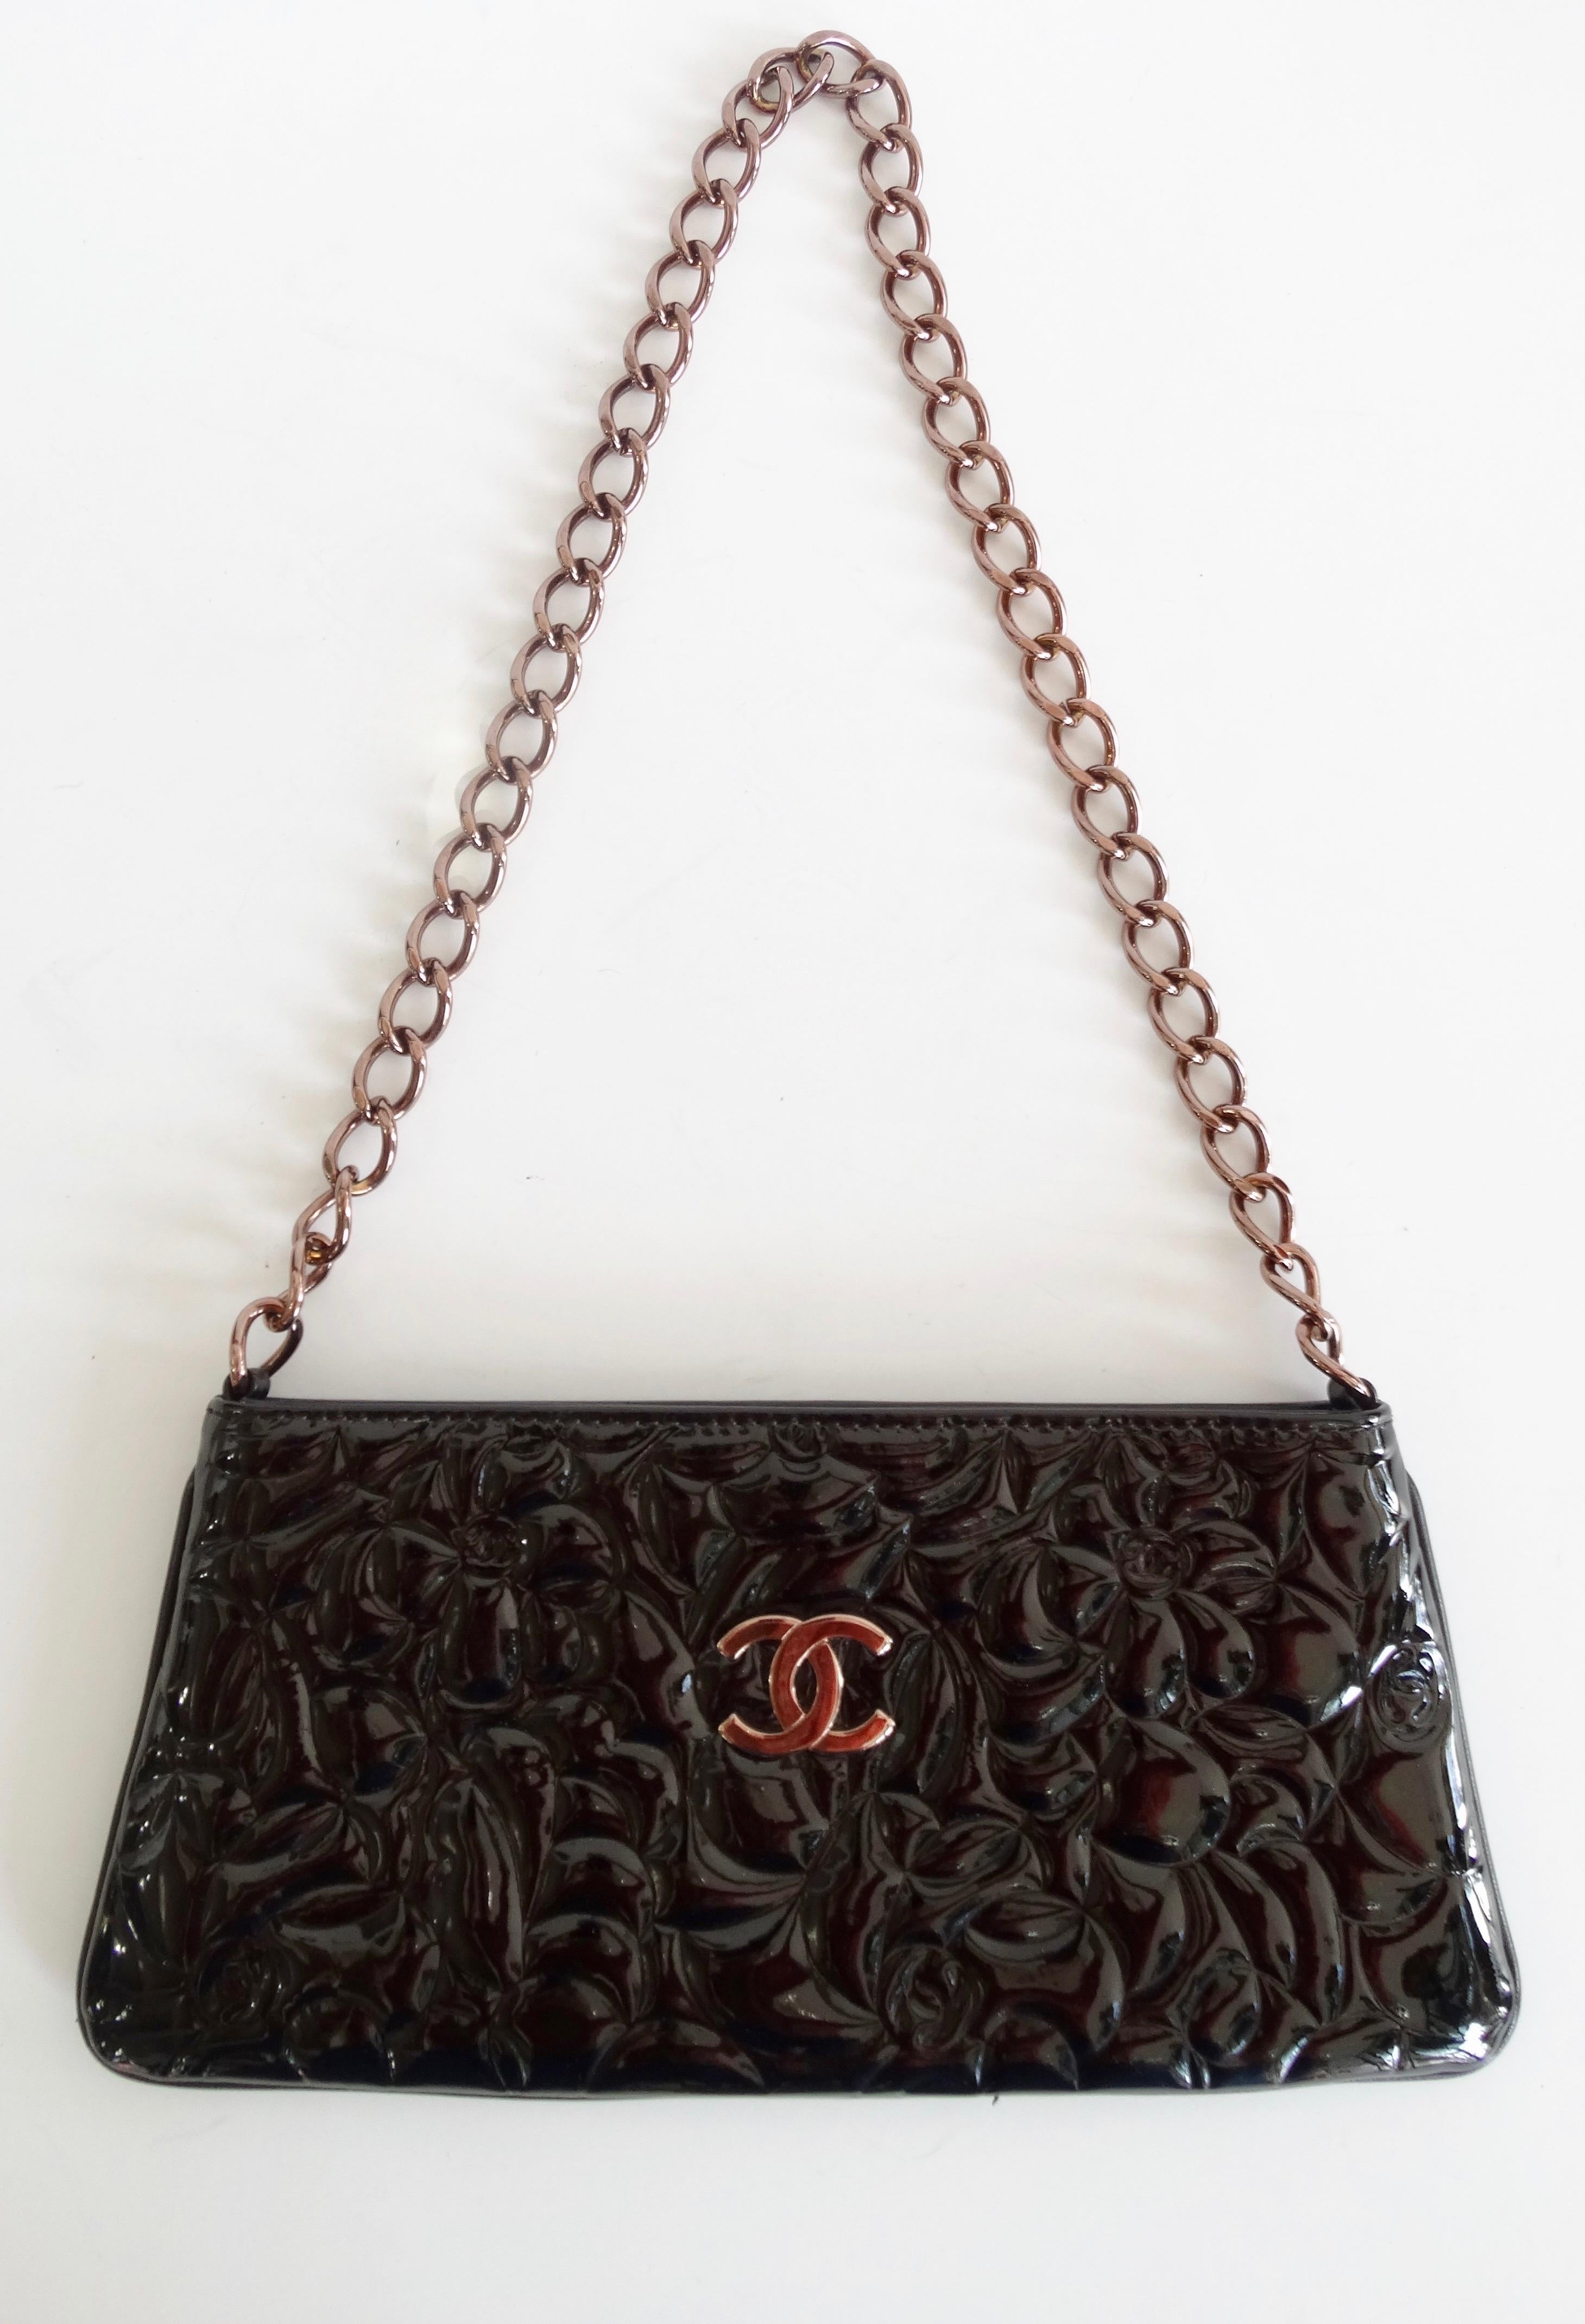 Complete your collection with this adorable Chanel bag! Circa 2003/2004 and made of back patent leather, this Chanel pochette is embossed with the iconic Camellia flower and small 'CC's. Front face features a bronze rose CC and chain link strap.